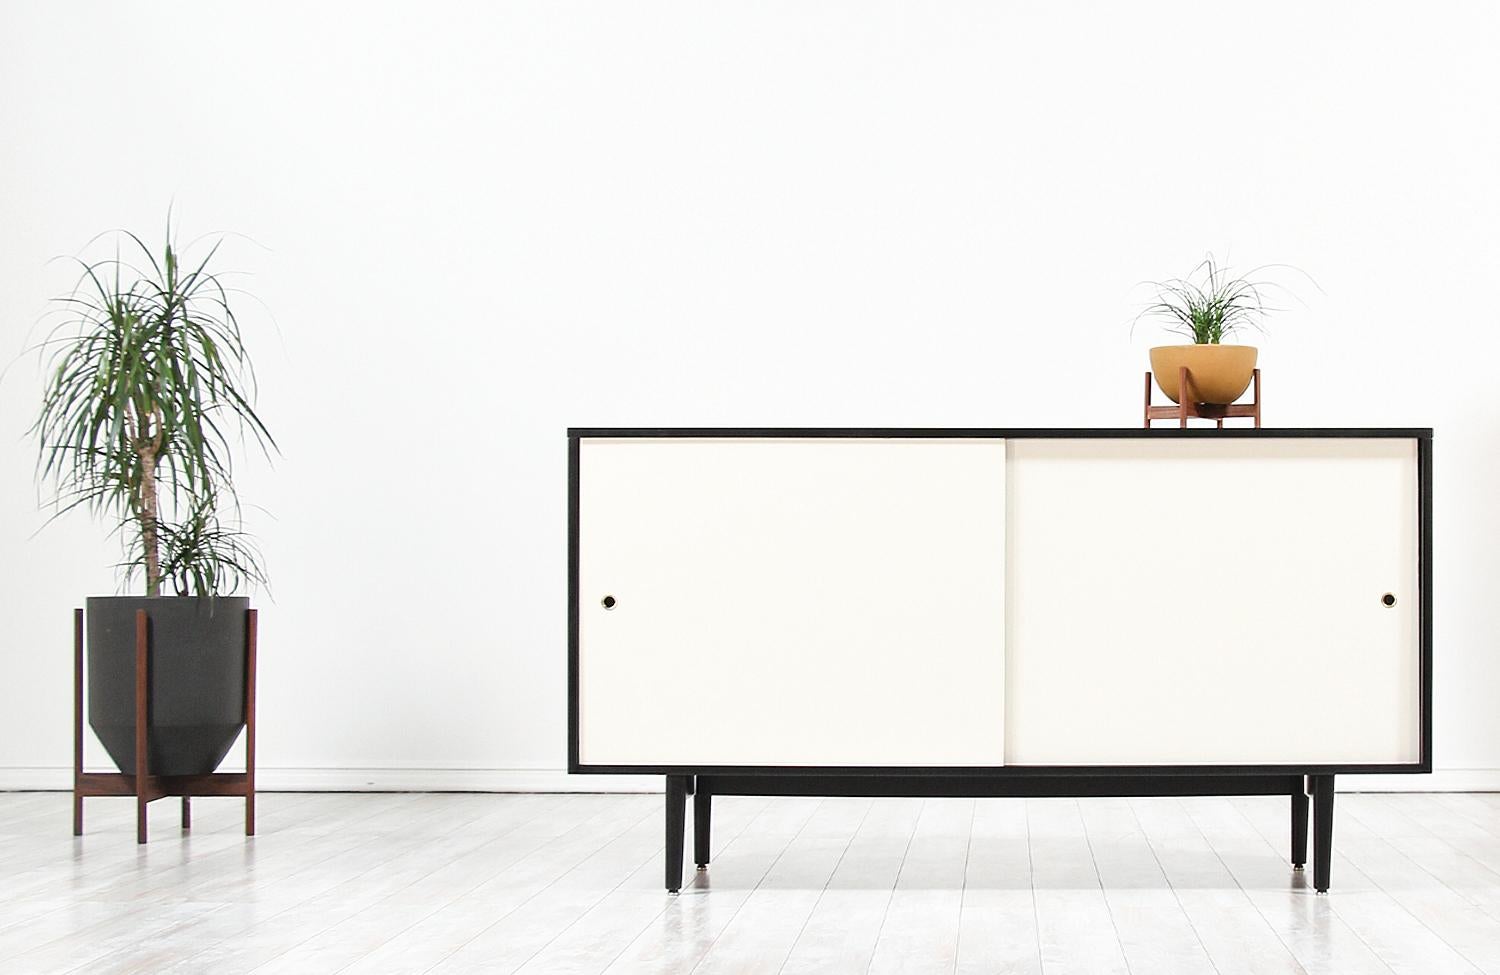 Mid-Century Modern credenza designed by Paul McCobb for Winchendon Furniture in the United States, circa 1950s. This handsome ebonized maple wood case belongs to McCobb’s famous ‘Planner Group’ line, which is recognized for its modern profiles and